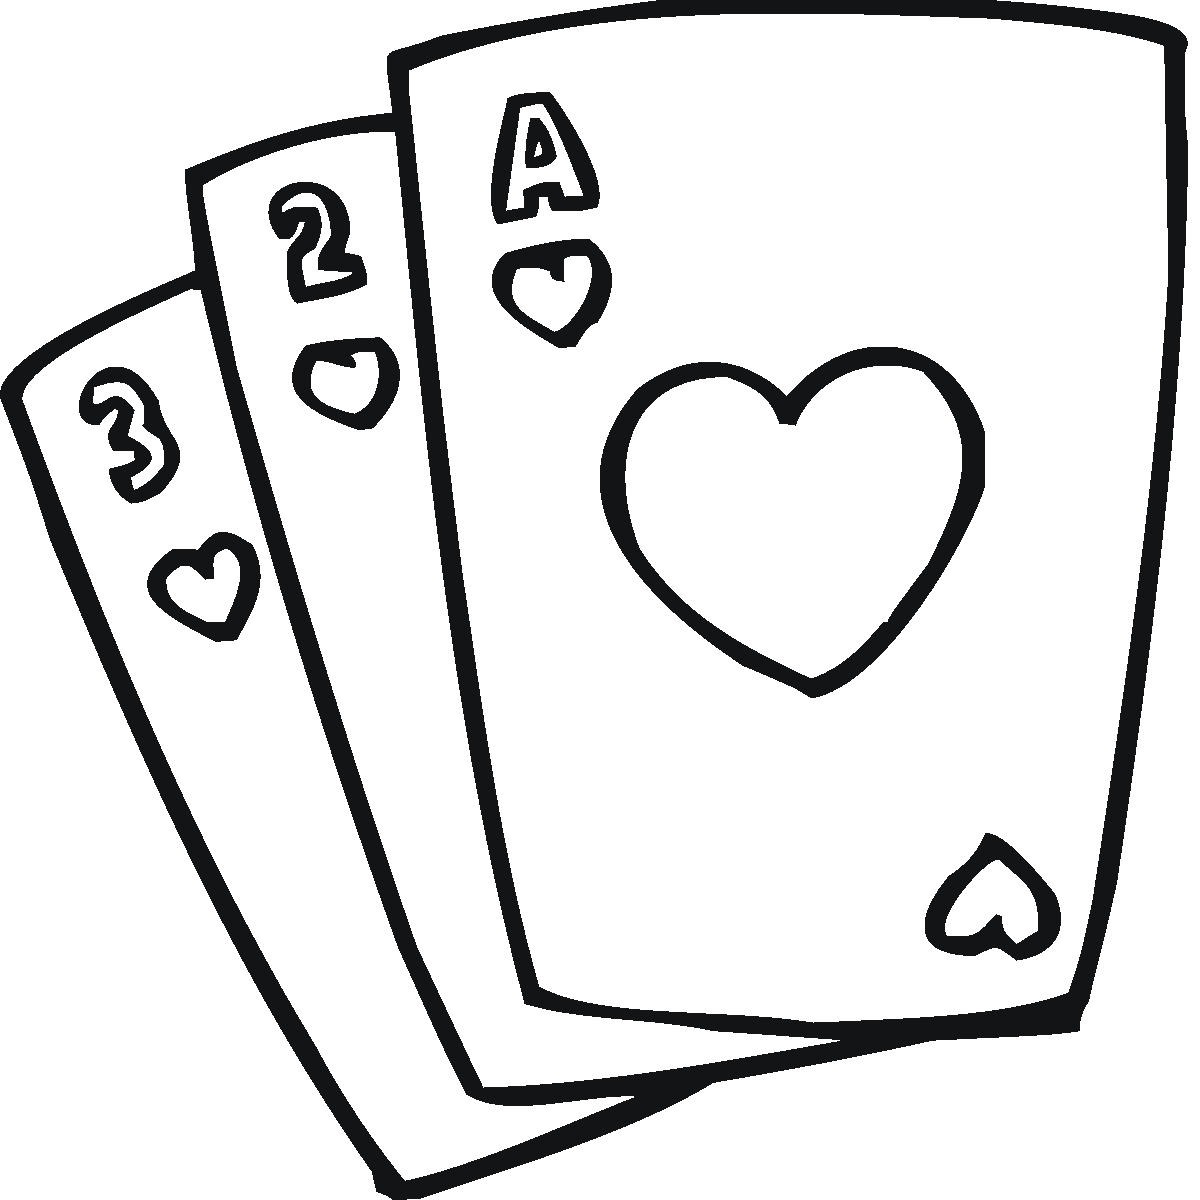 Pix For > Cards Clipart